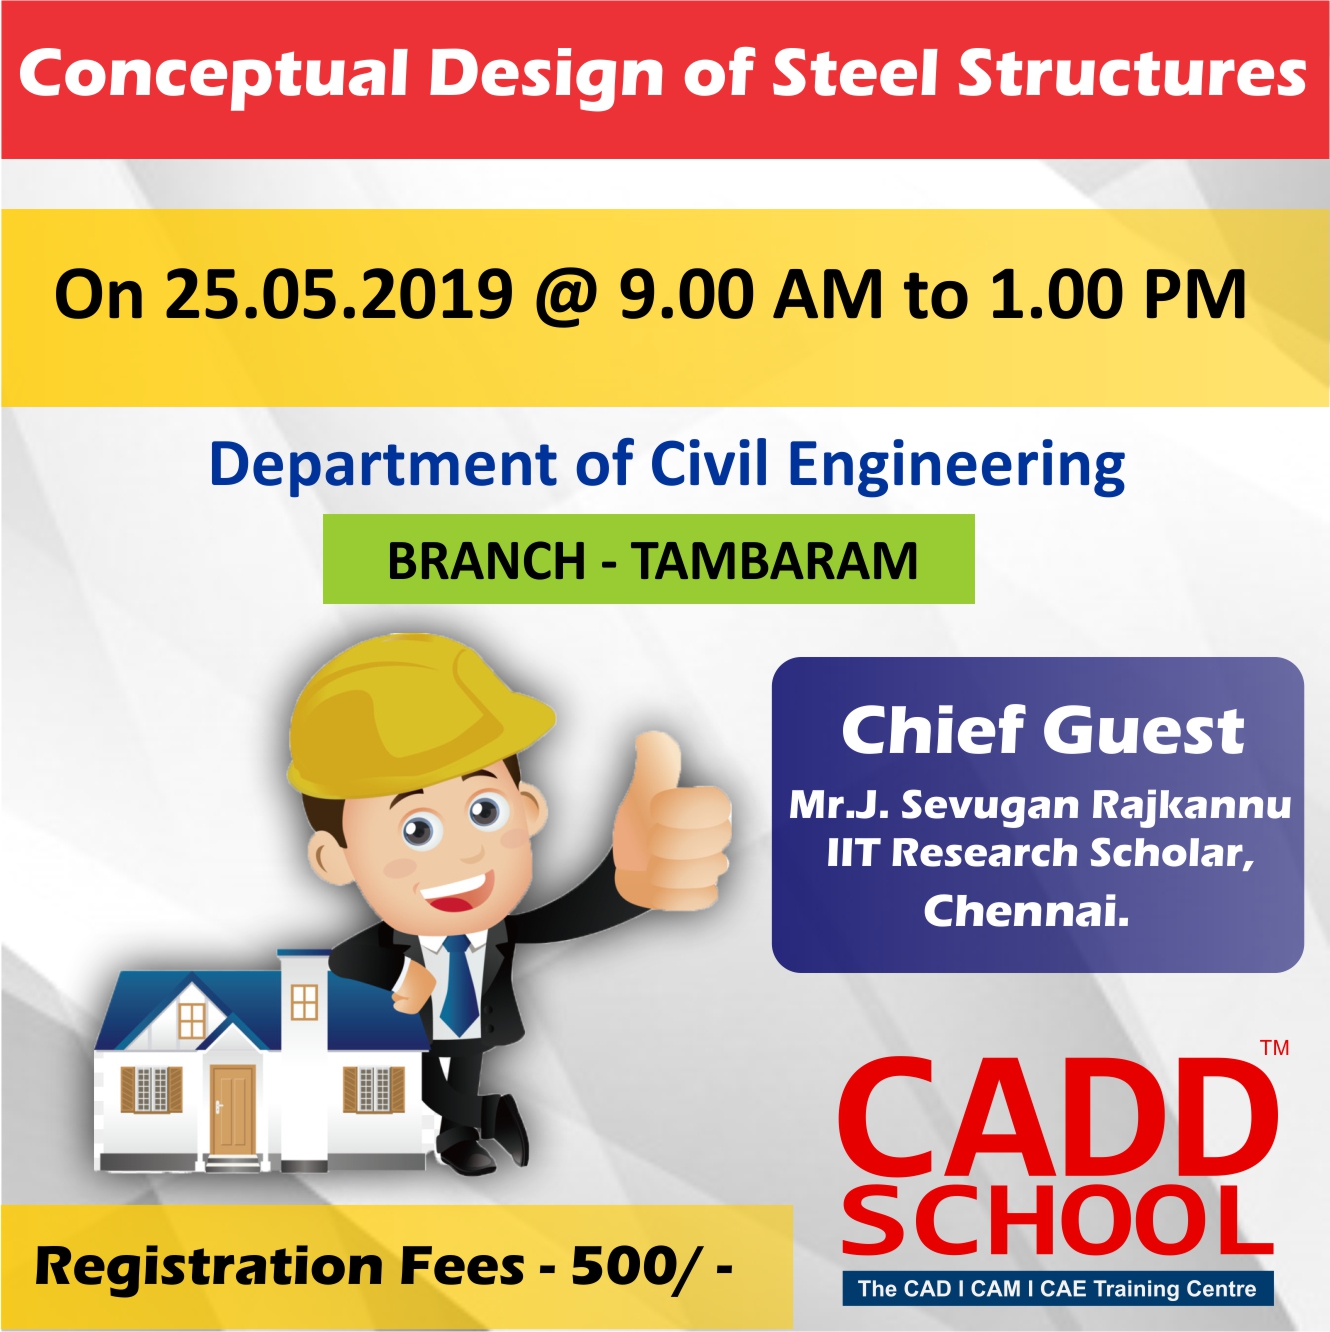 Conceptual Design of Steel Structure